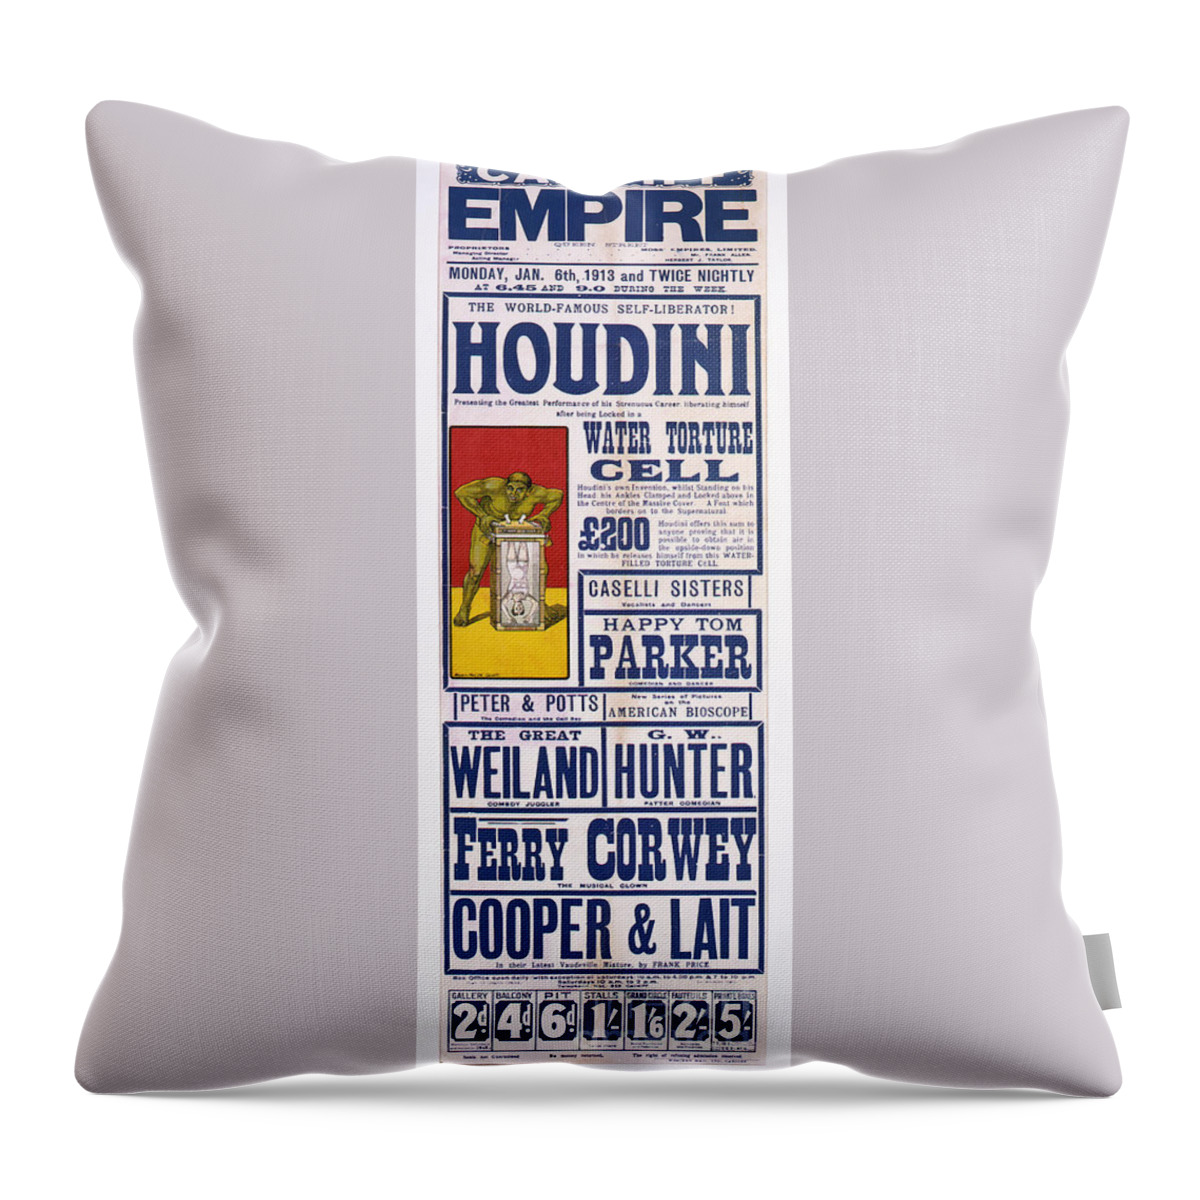 1913 Throw Pillow featuring the drawing Houdini Poster Ad by Granger